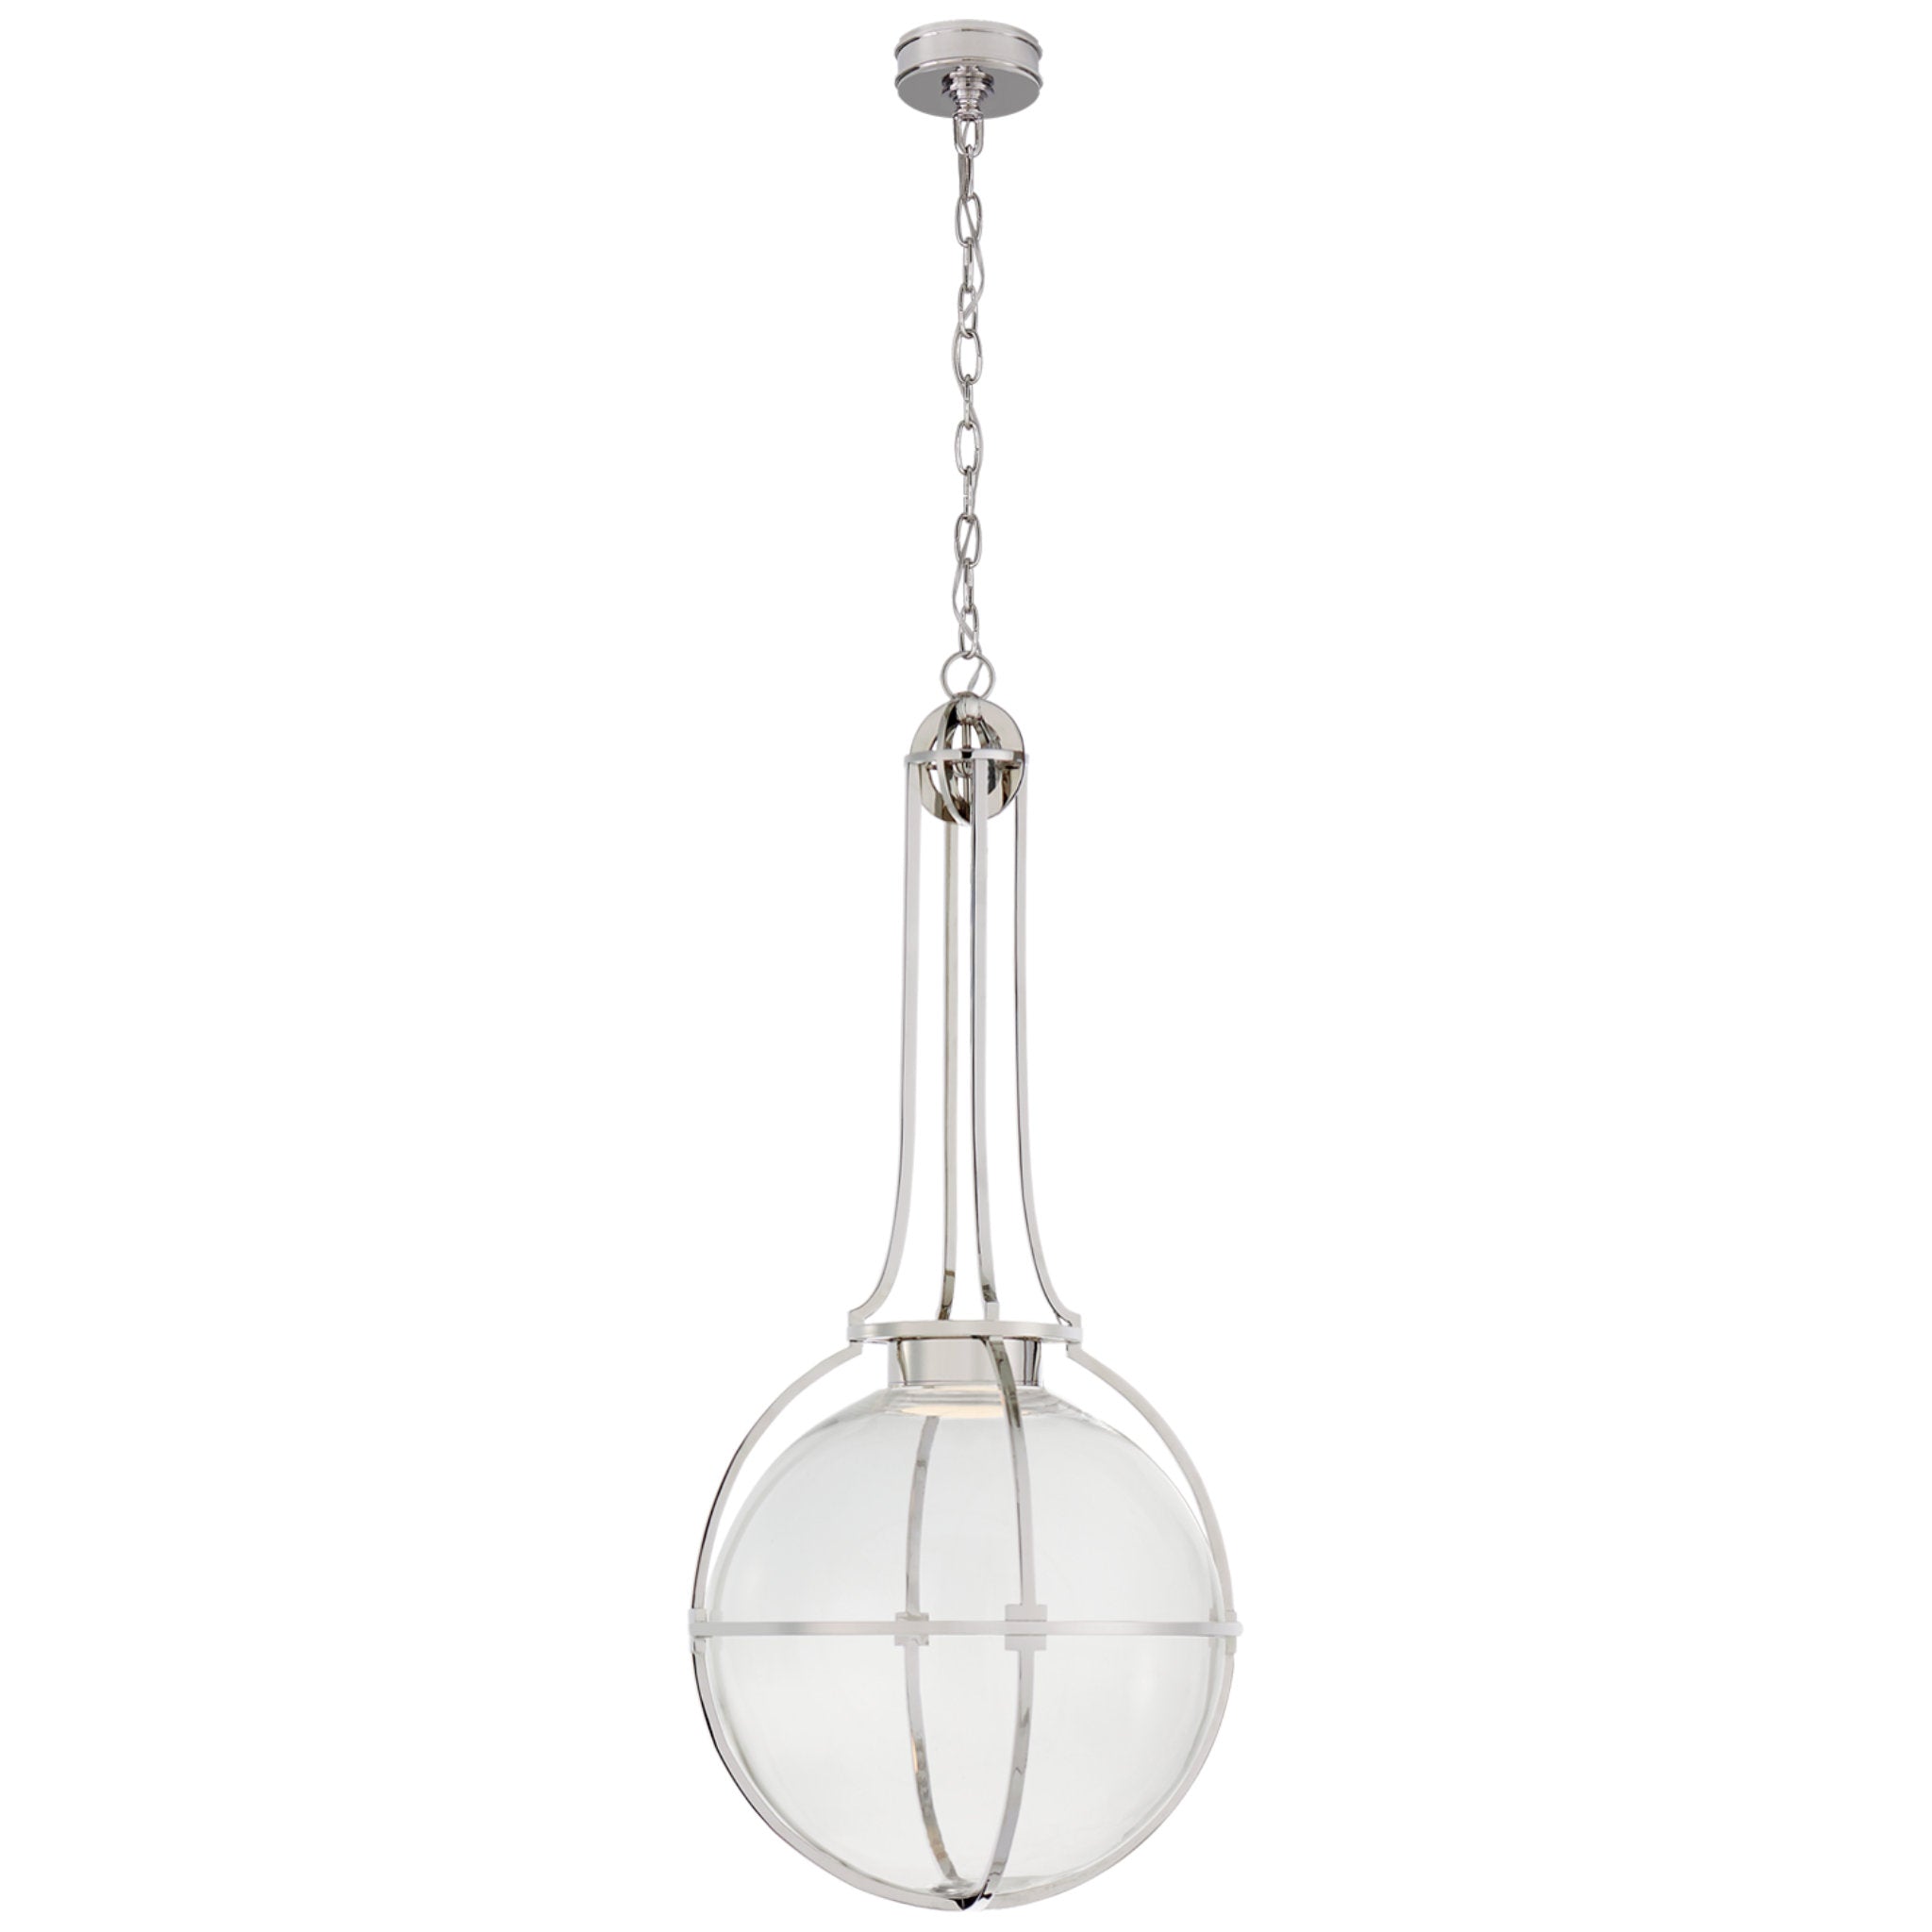 Chapman & Myers Gracie Large Captured Globe Pendant in Polished Nickel with Clear Glass